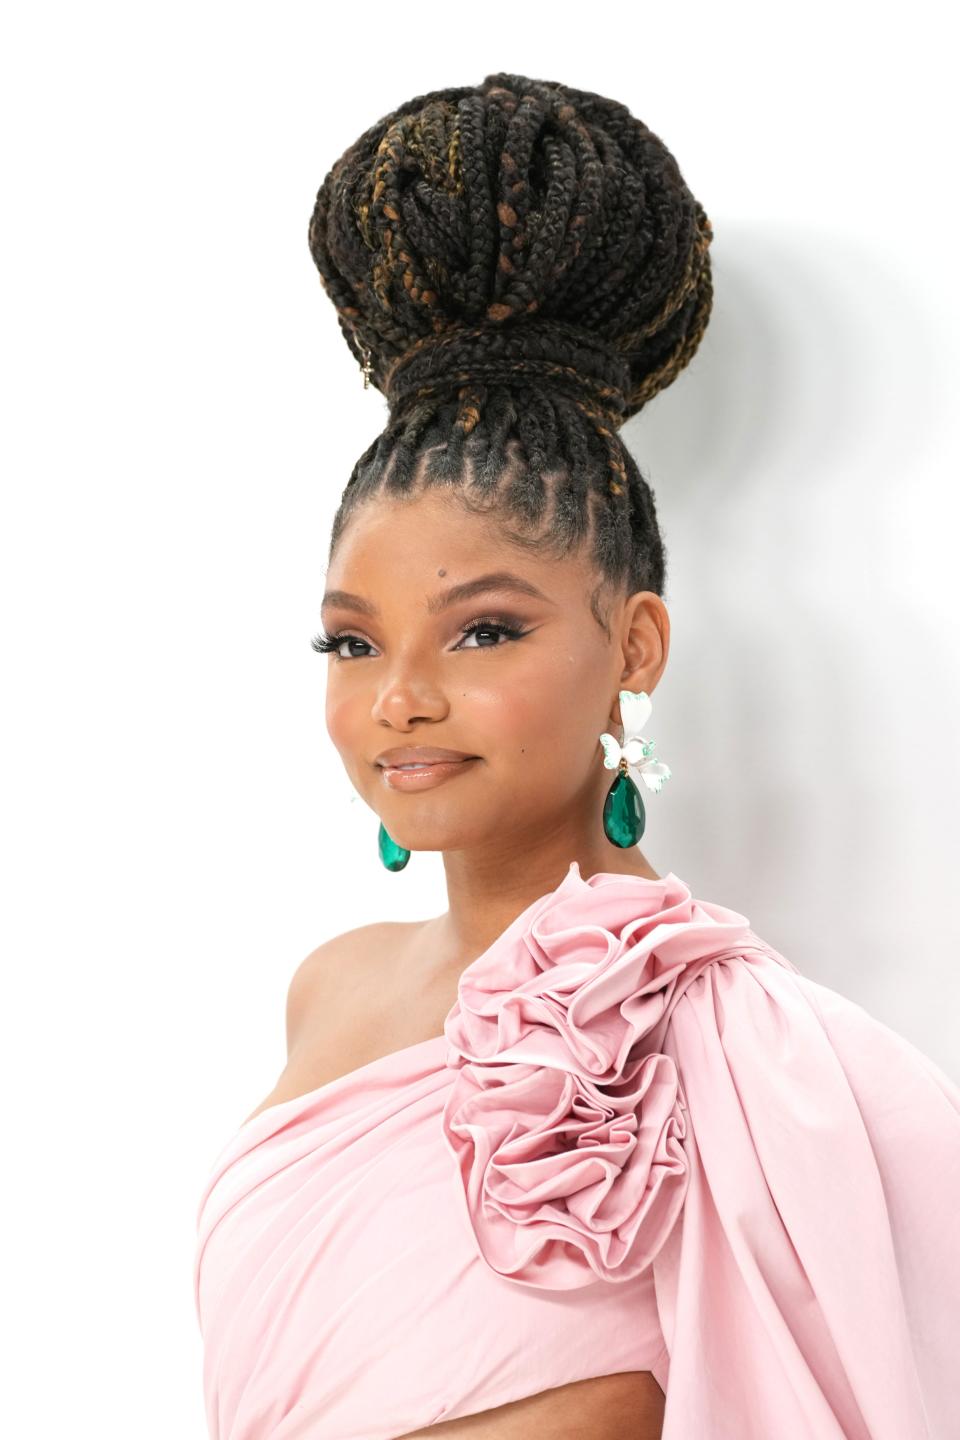 Halle Bailey attends the 2022 CFDA Fashion Awards on November 7, 2022.